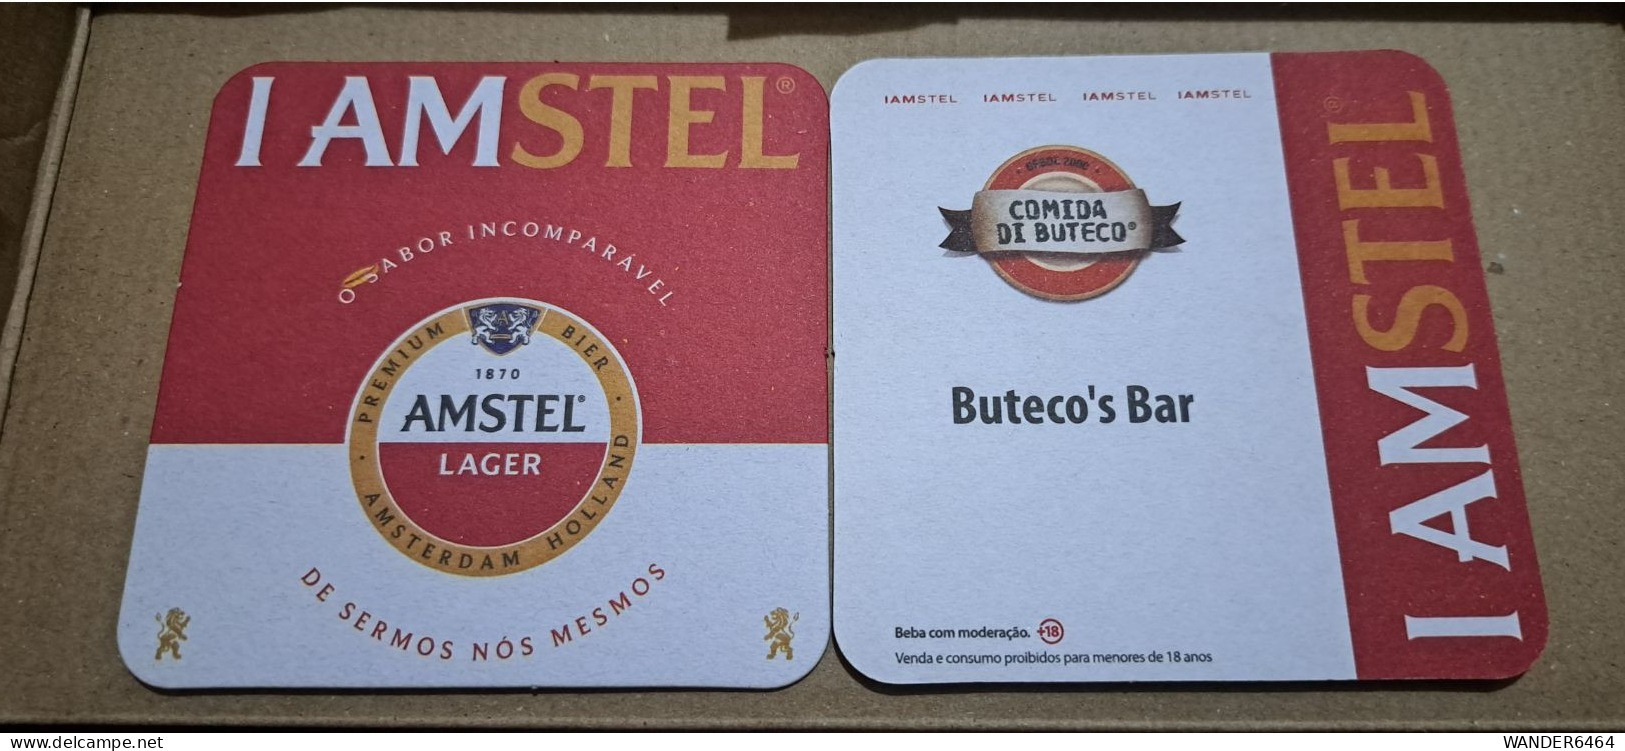 AMSTEL HISTORIC SET BRAZIL BREWERY  BEER  MATS - COASTERS #048  BUTECO'S BAR - Sotto-boccale